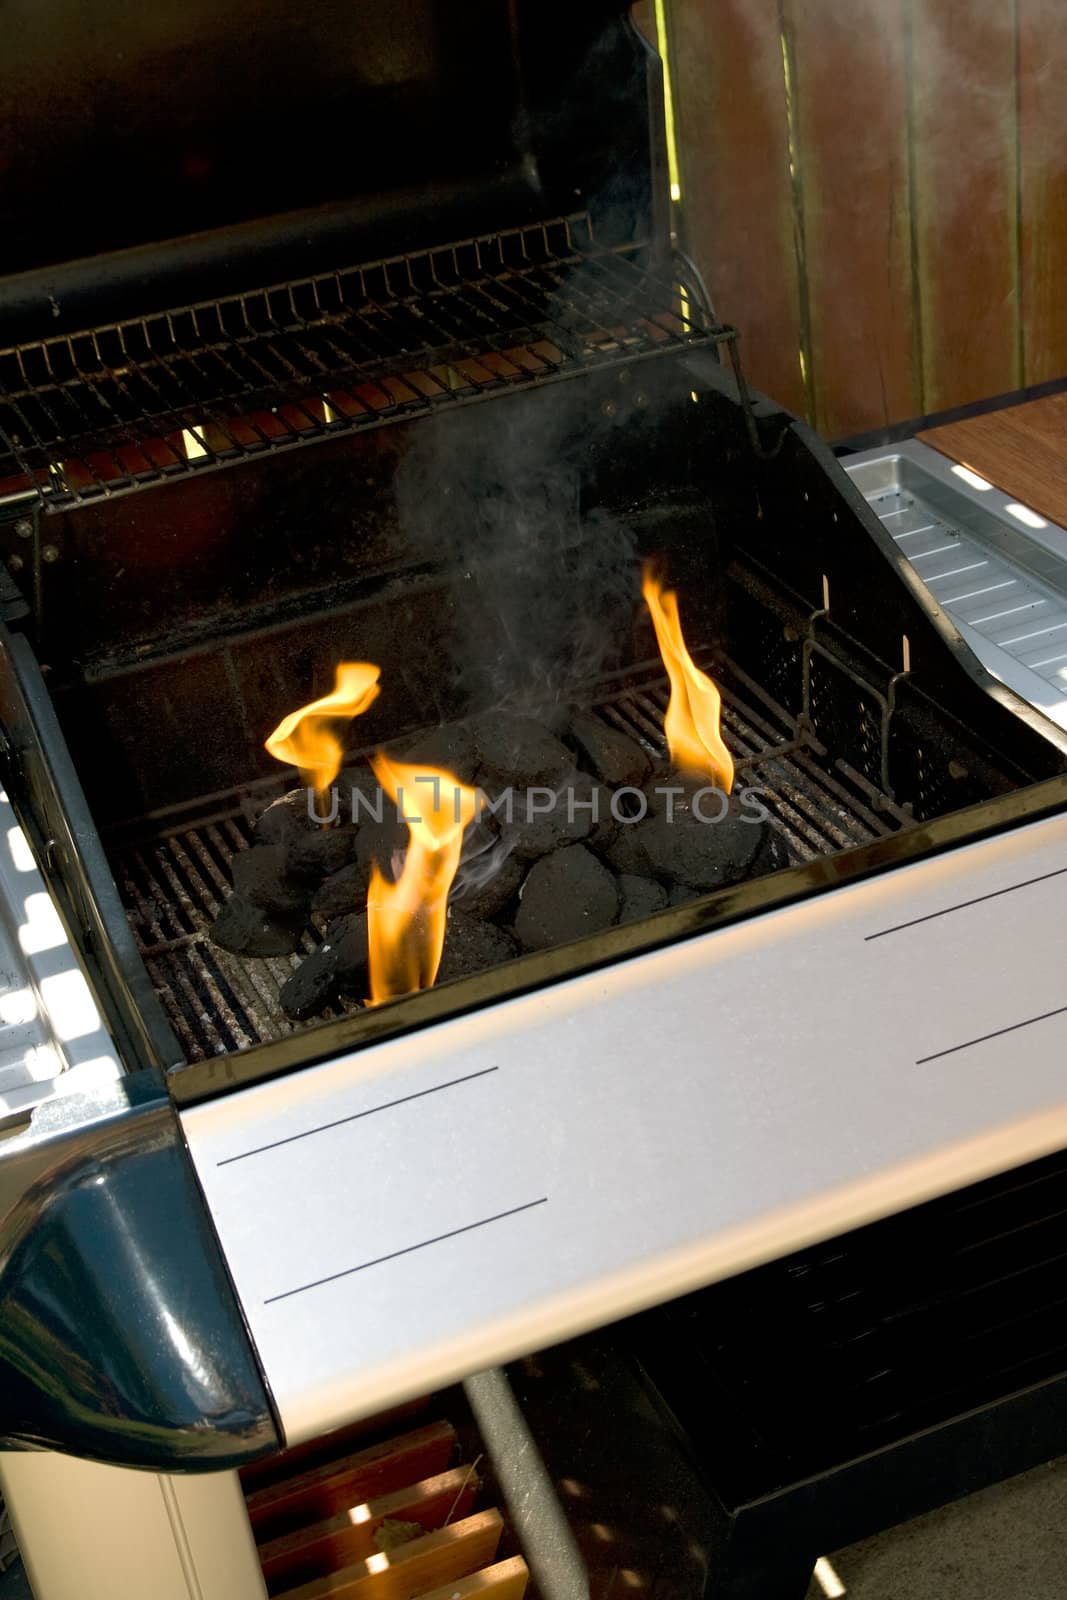 Chrome and blue Barbecue fire with orange flames and black charcoal